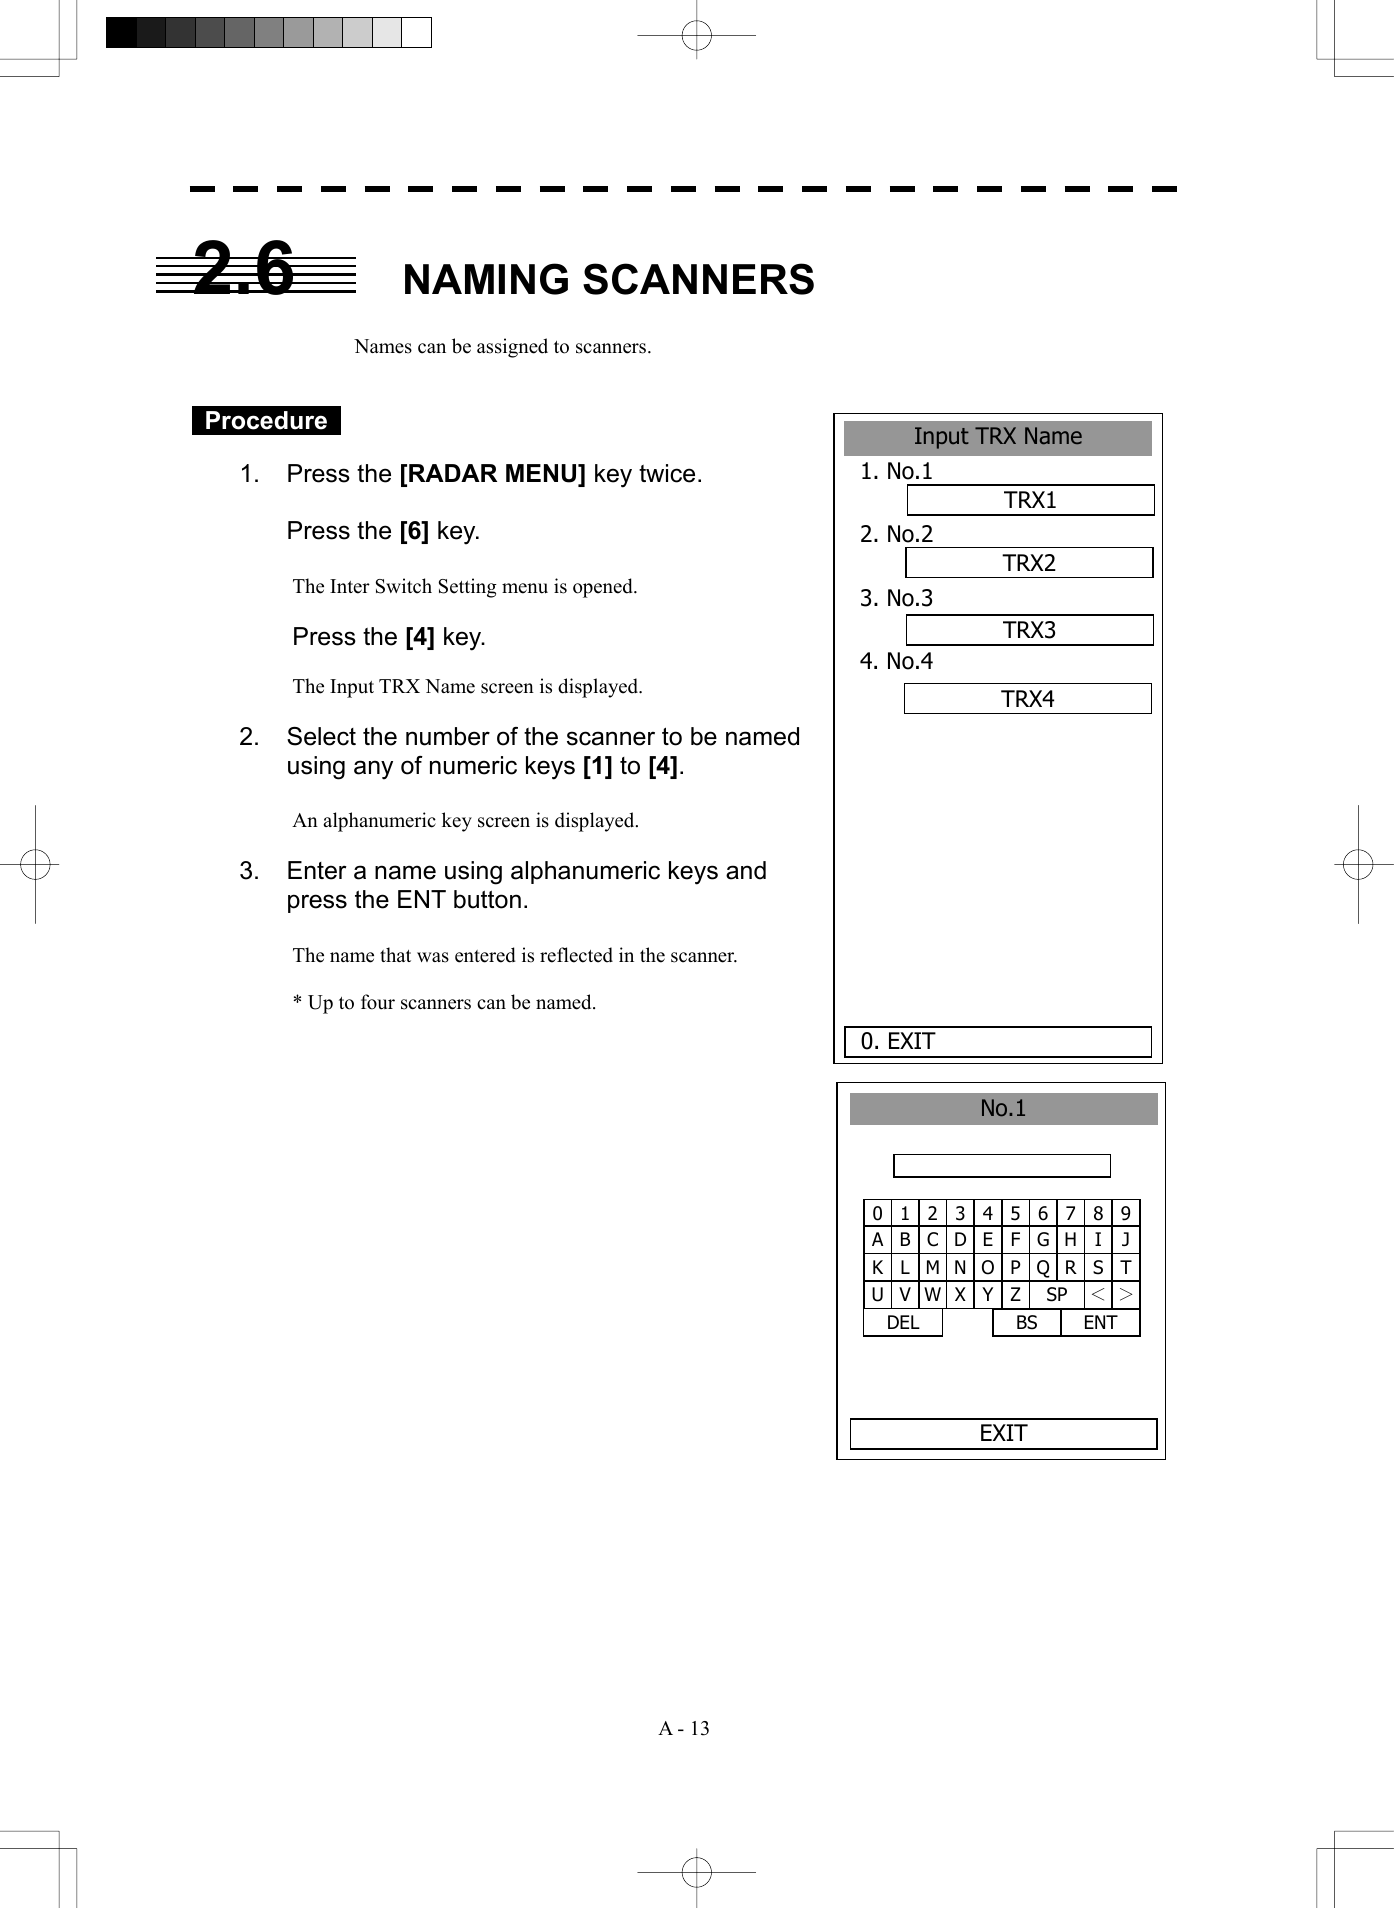  A - 13 2.6 NAMING SCANNERS  Names can be assigned to scanners.    Procedure   1. Press the [RADAR MENU] key twice.   Press the [6] key.  The Inter Switch Setting menu is opened.  Press the [4] key.  The Input TRX Name screen is displayed.  2.  Select the number of the scanner to be named using any of numeric keys [1] to [4].  An alphanumeric key screen is displayed.    3.  Enter a name using alphanumeric keys and press the ENT button.    The name that was entered is reflected in the scanner.  * Up to four scanners can be named.                  1 2 34 5 6 7 8 90 B C DE F G H I JA L M N O P Q R S TK V W X Y Z SP ＜ ＞U DEL  ENT BS No.1EXITInput TRX Name1. No.1 2. No.2 3. No.3 4. No.4 0. EXIT TRX1TRX2TRX3TRX4